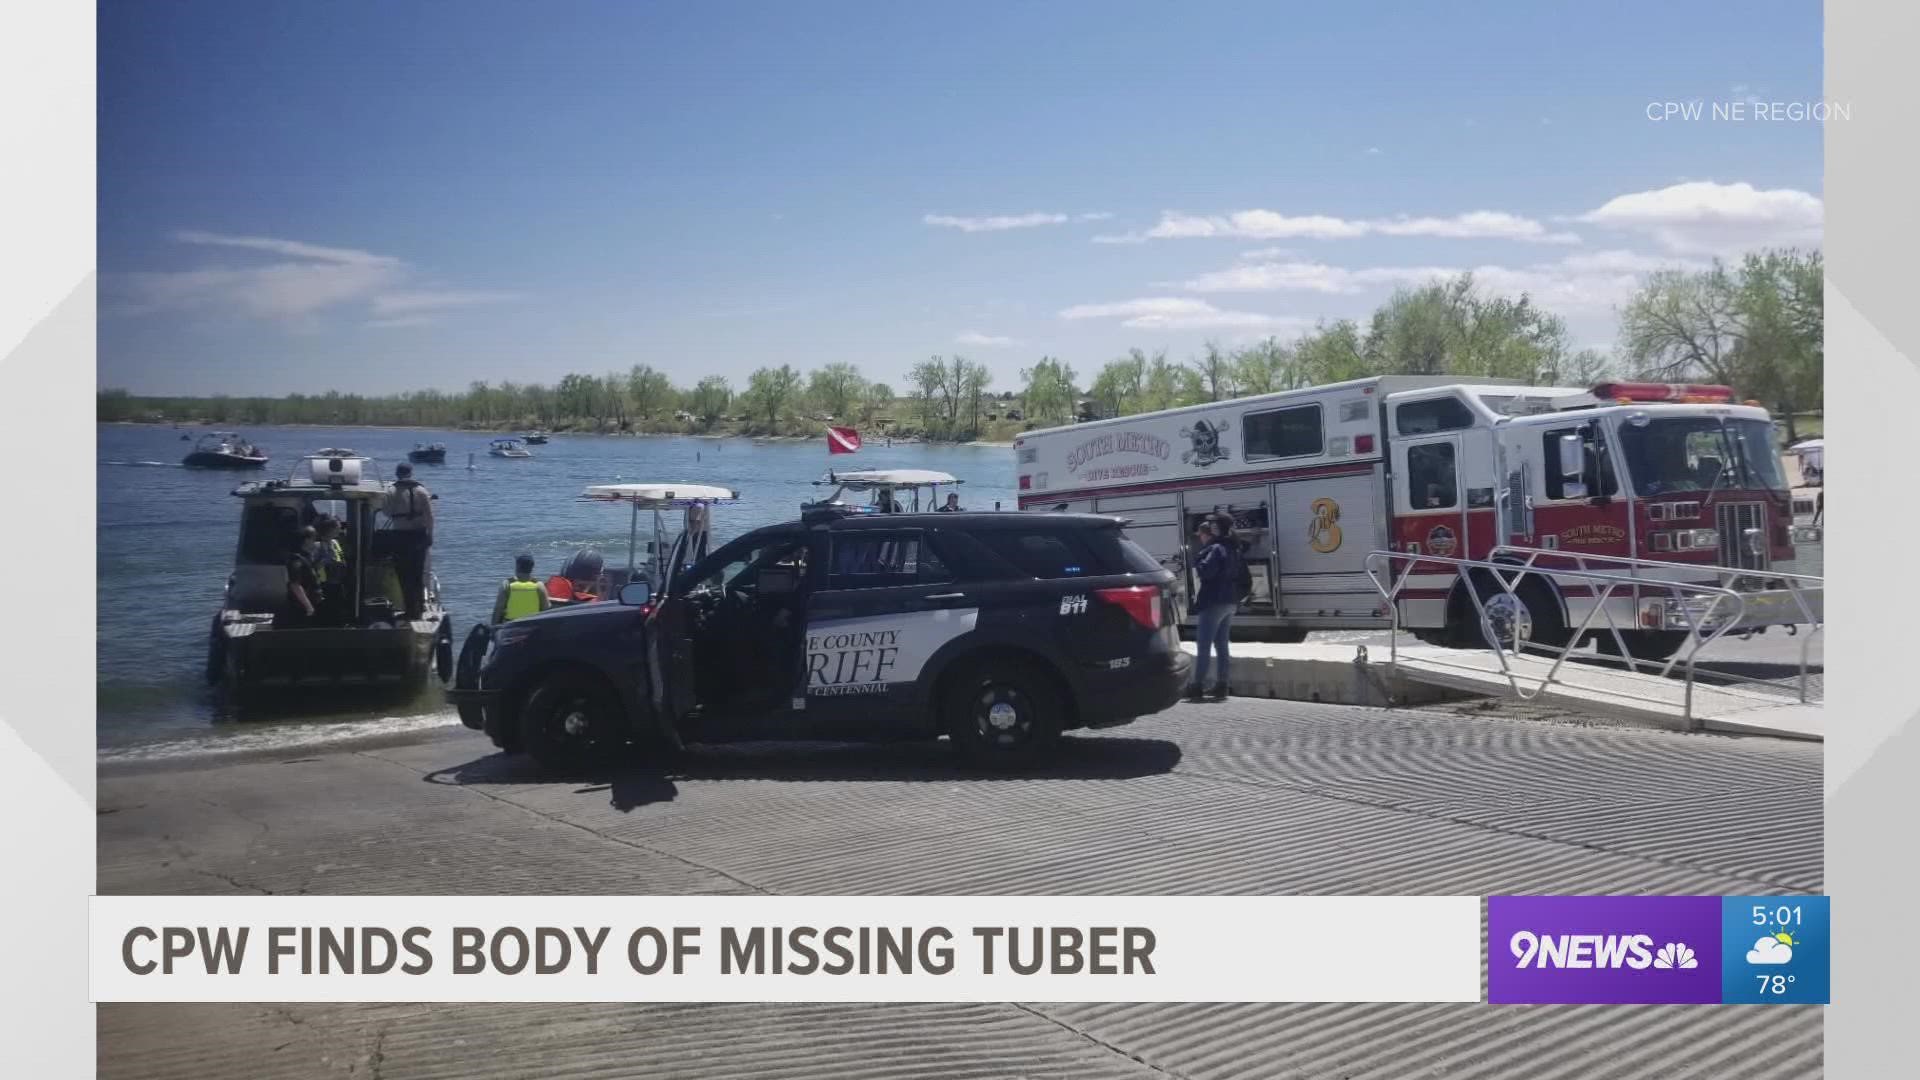 The 29-year-old man went missing while tubing on May 7.